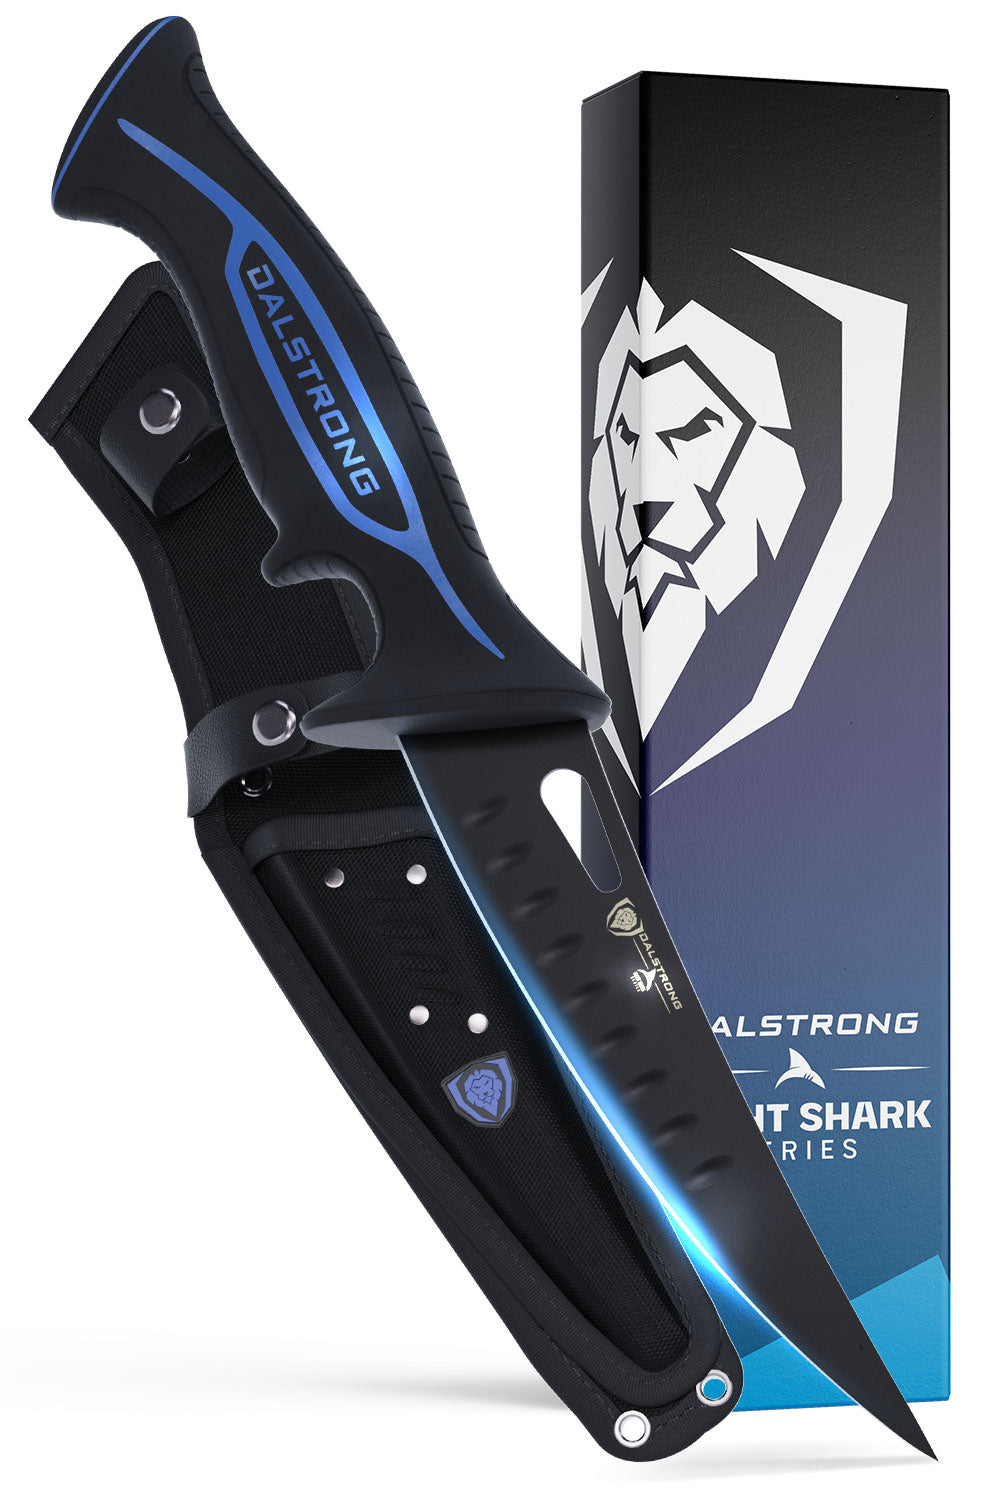 Dalstrong night shark series 6 inch curved boning knife in front of it's premium packaging.